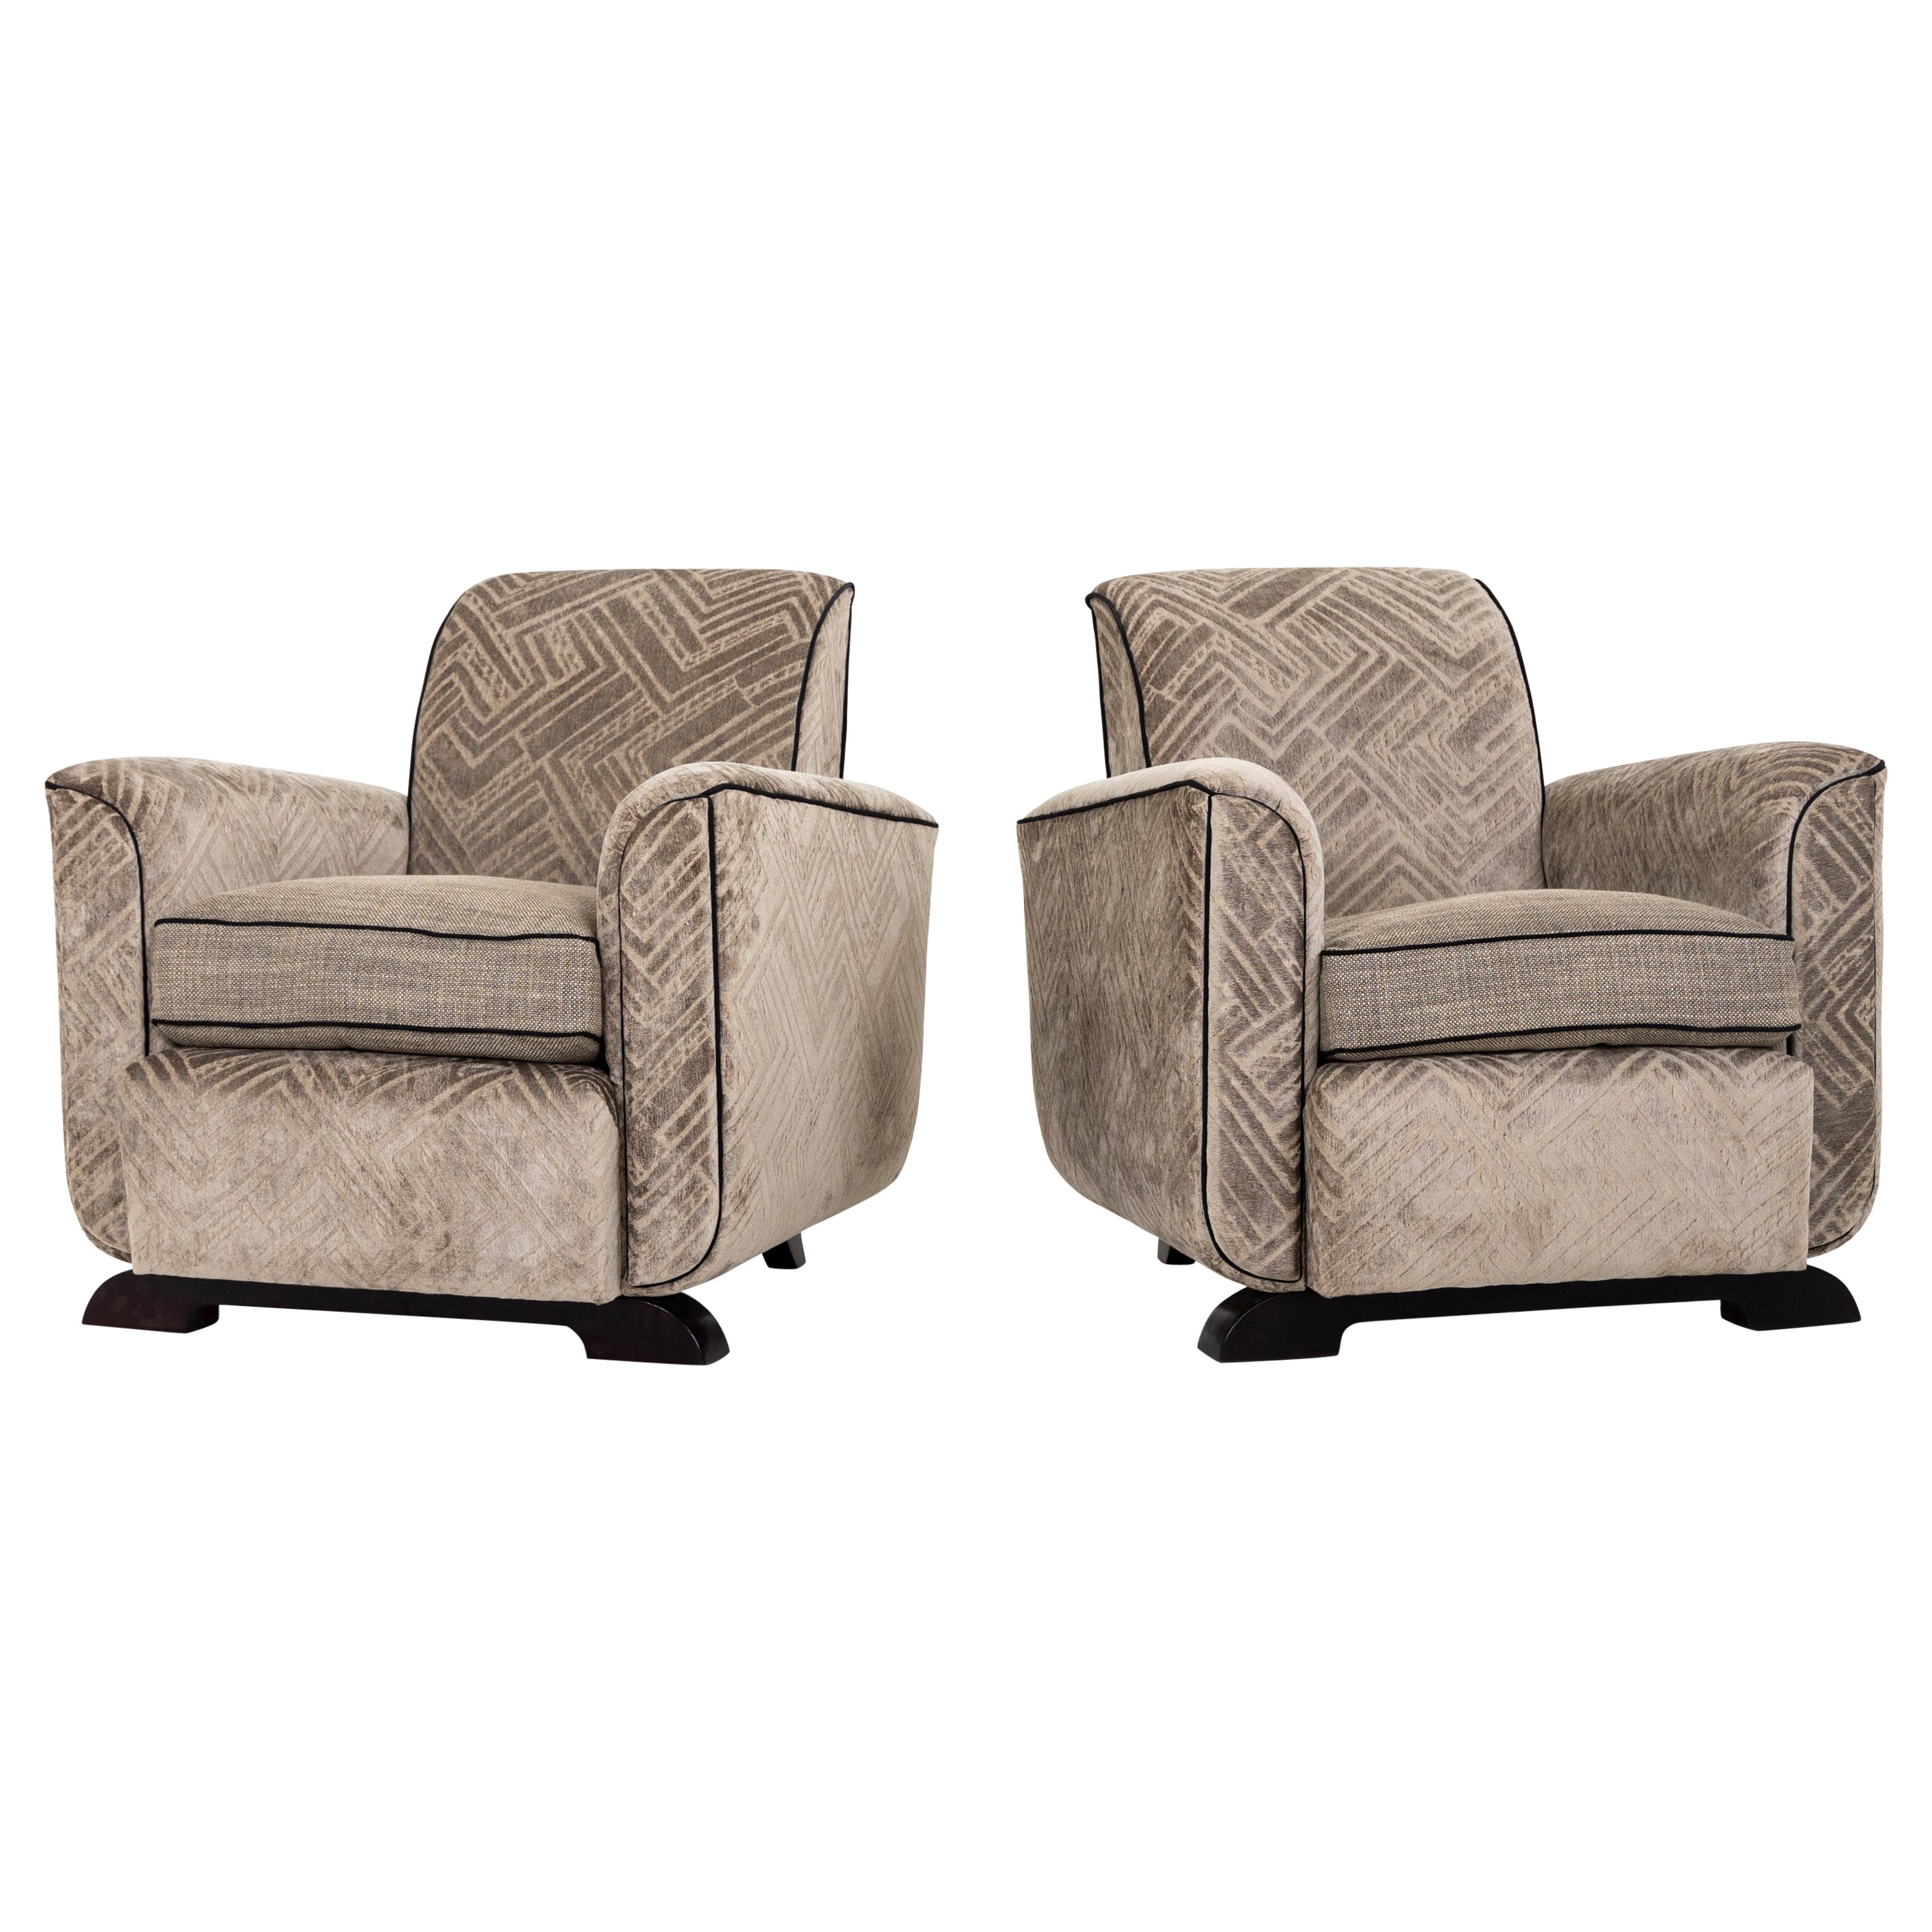 Pair of Art Deco Lounge Chairs, France, 1920s For Sale